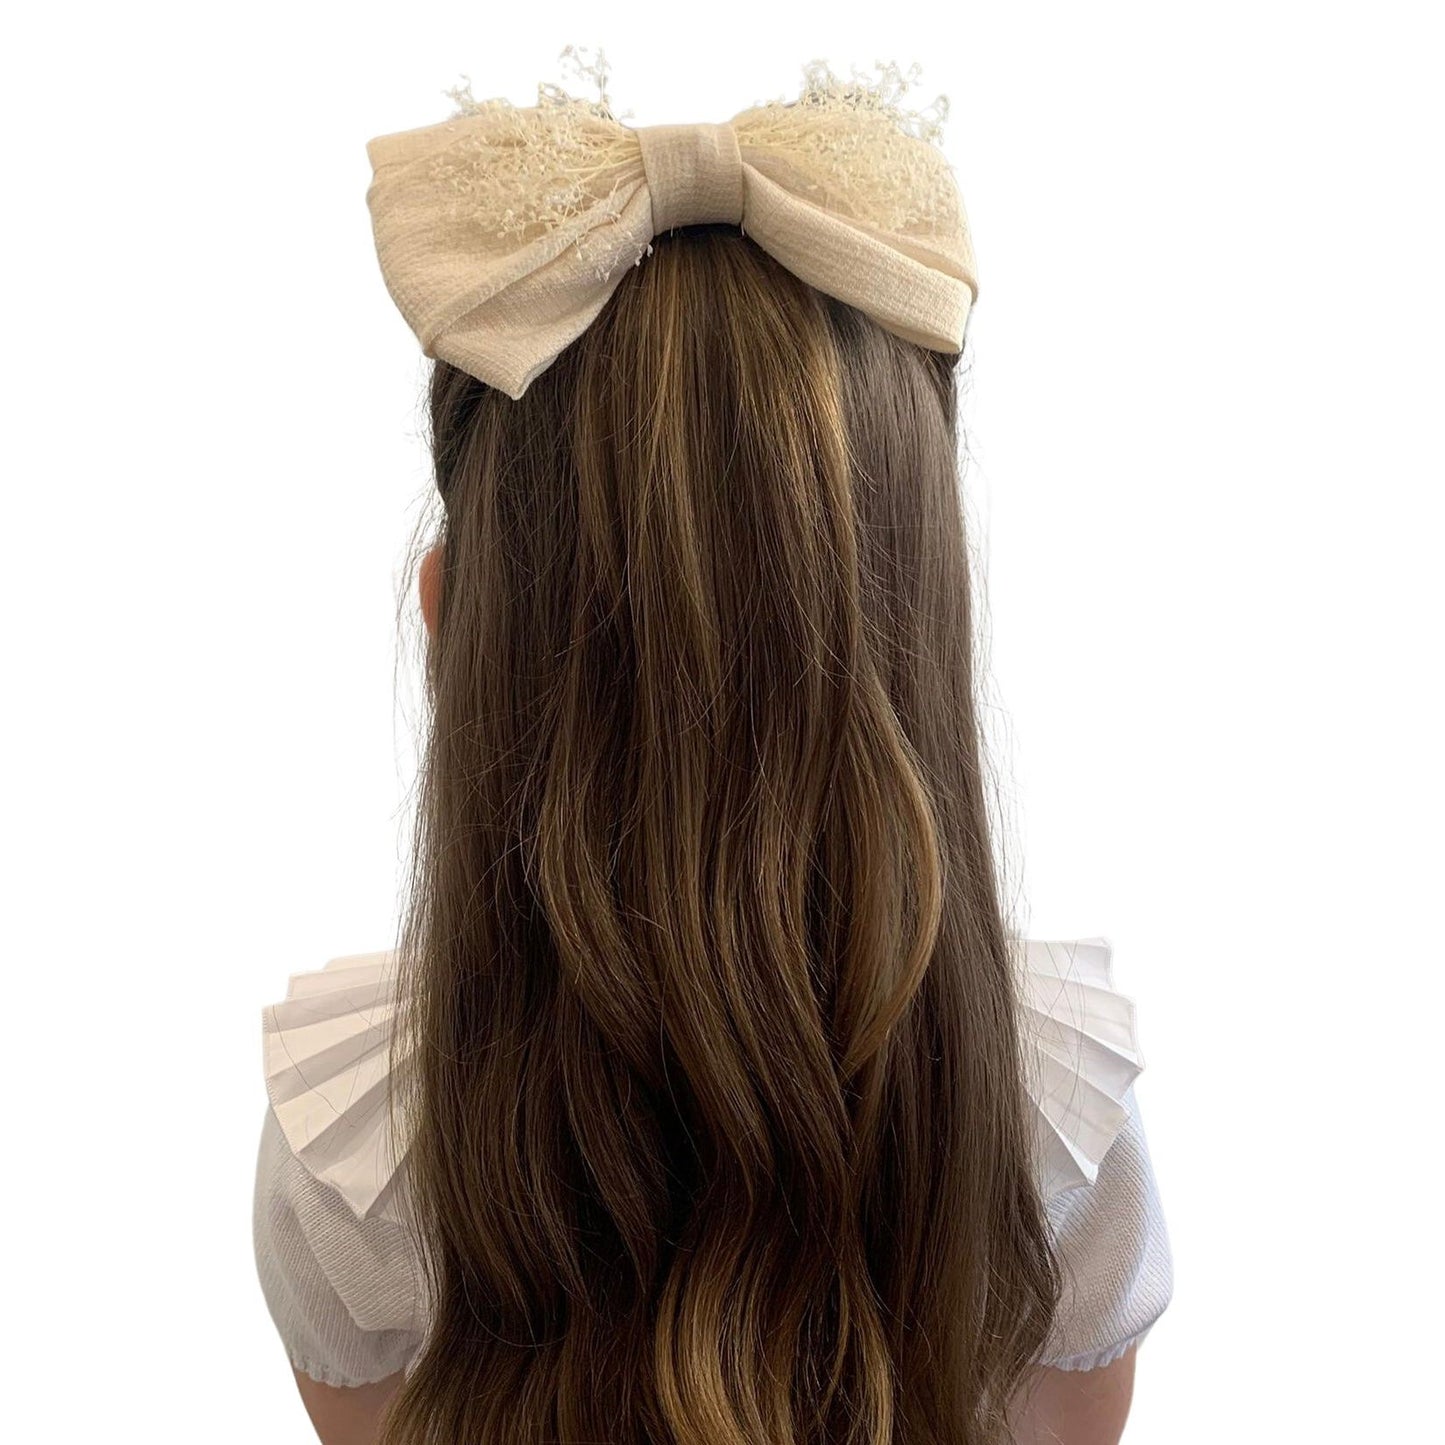 Large Cream Hairbow With Blooms 346 - Lala Kids 